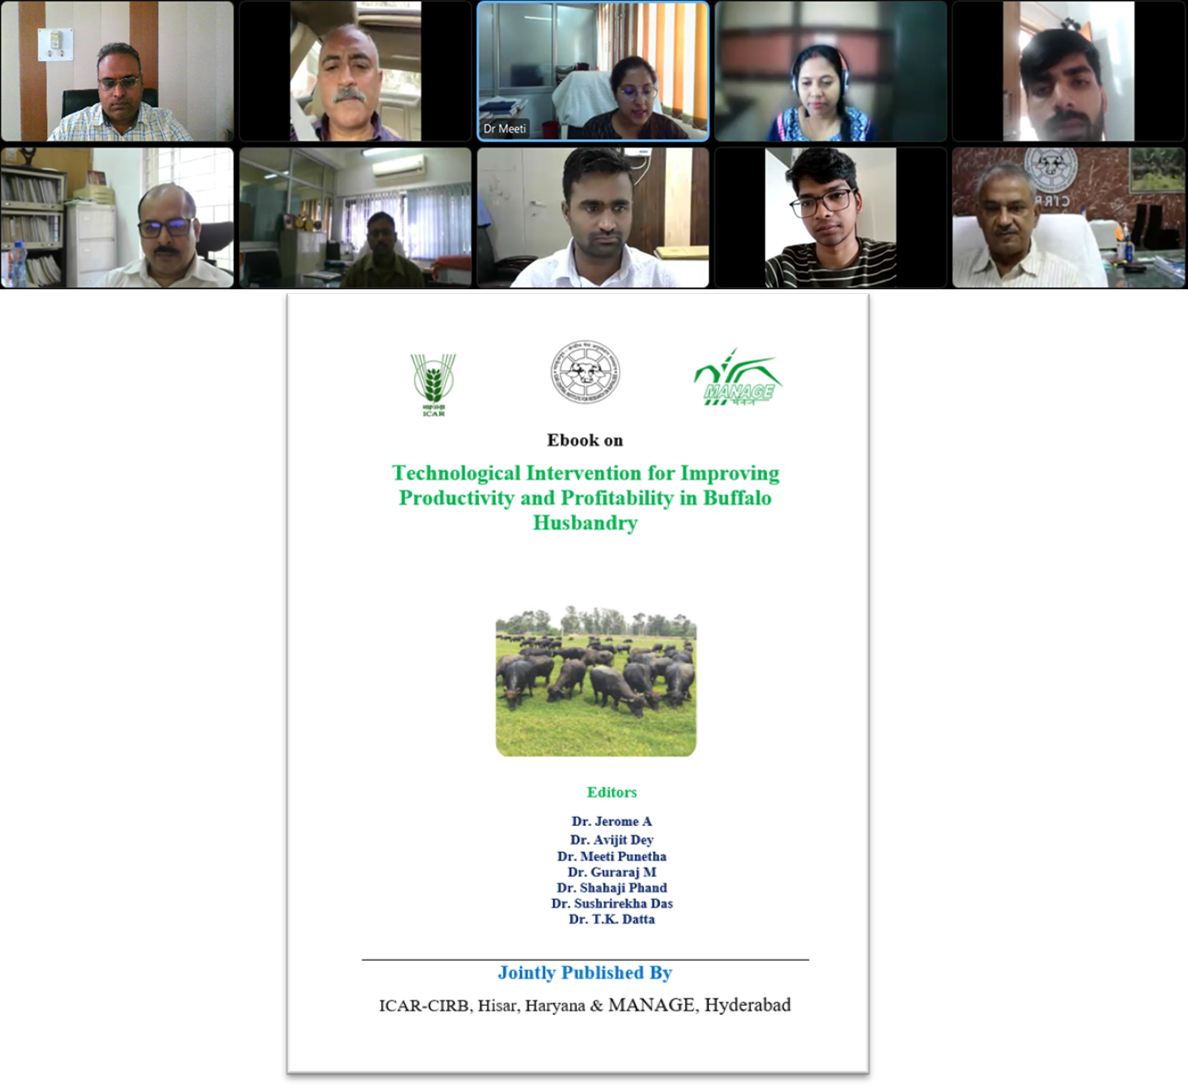 A collaborative training program on “Technological Interventions for improving productivity and profitability in Buffalo Husbandry”